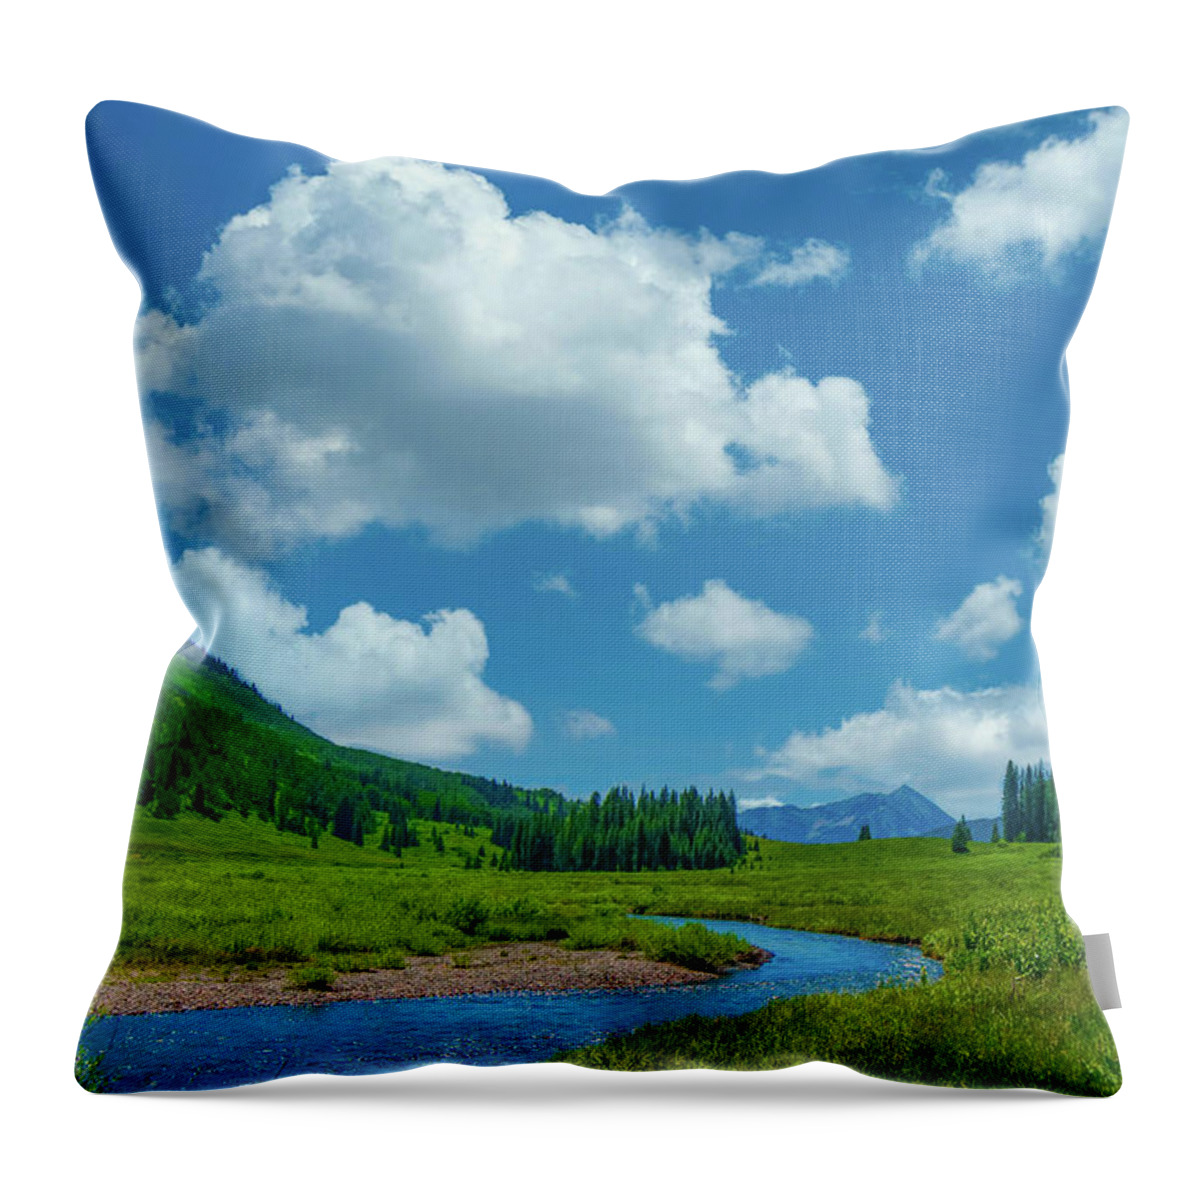 Calm Throw Pillow featuring the photograph East River at Crested Butte, Mountain River Winding Through Lush Green Pasture by Tom Potter